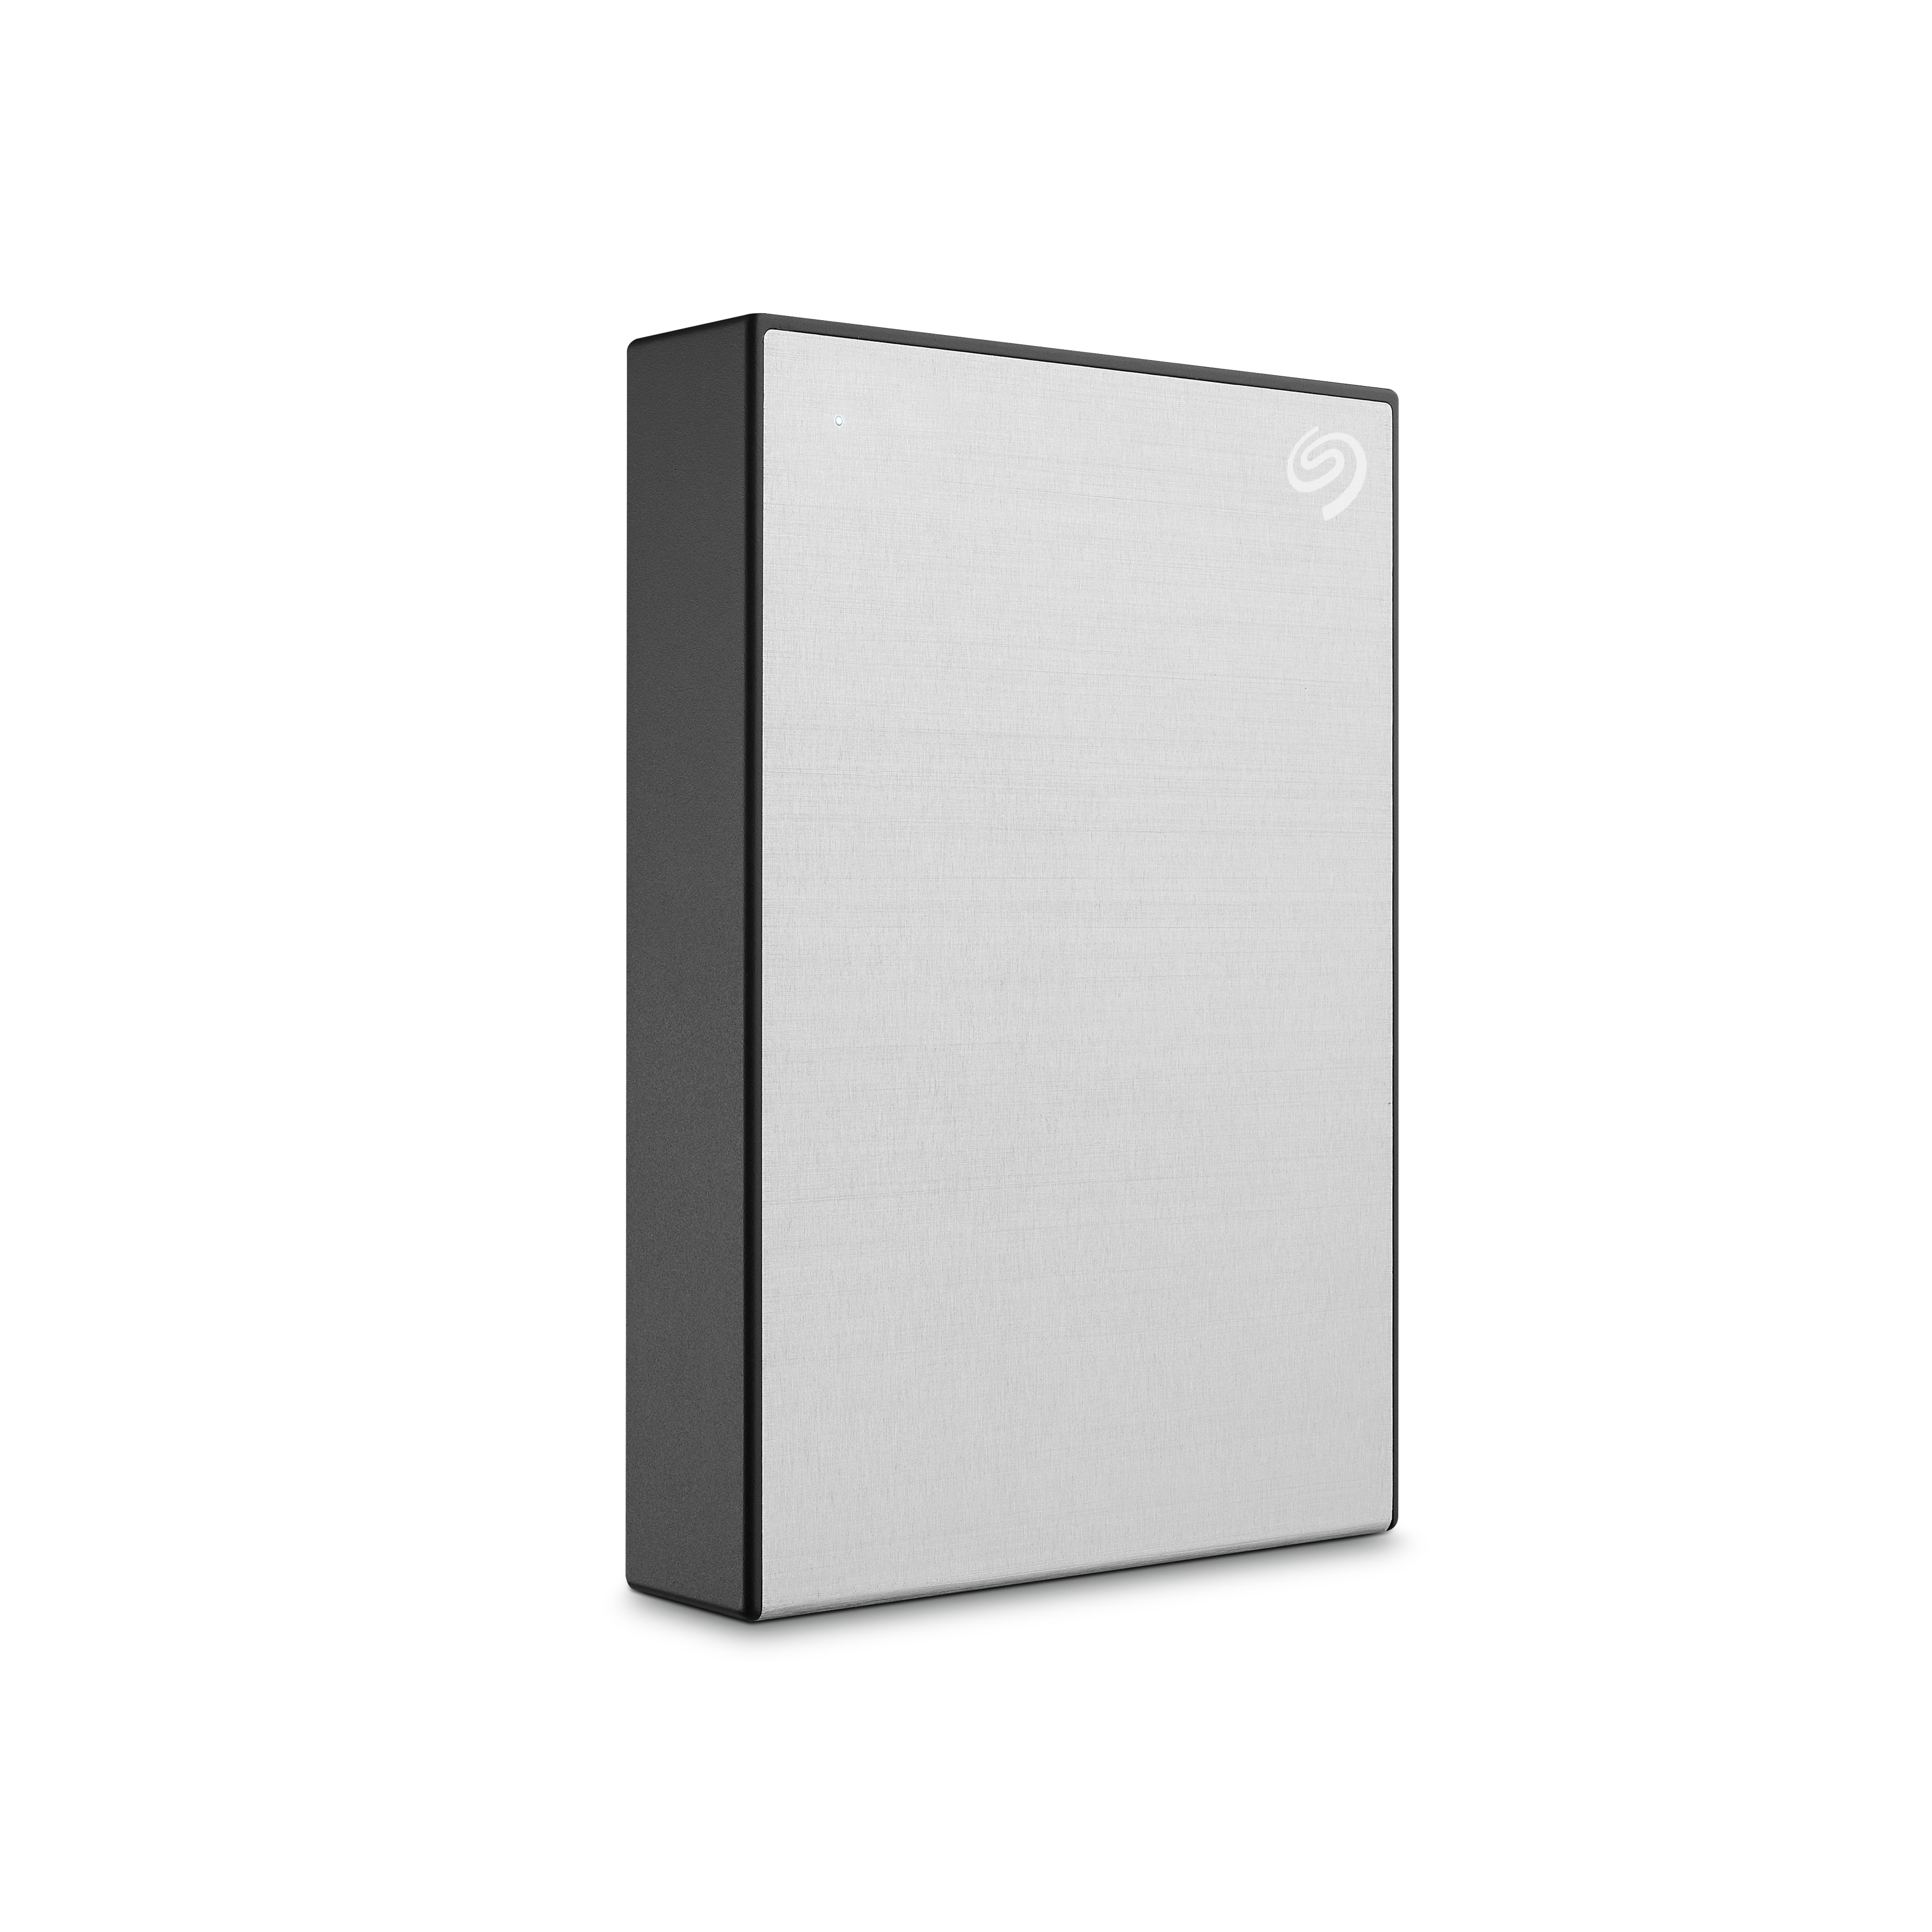 SEAGATE One Touch mobile HDD, 5 extern, 2,5 Zoll, TB Silber Festplatte